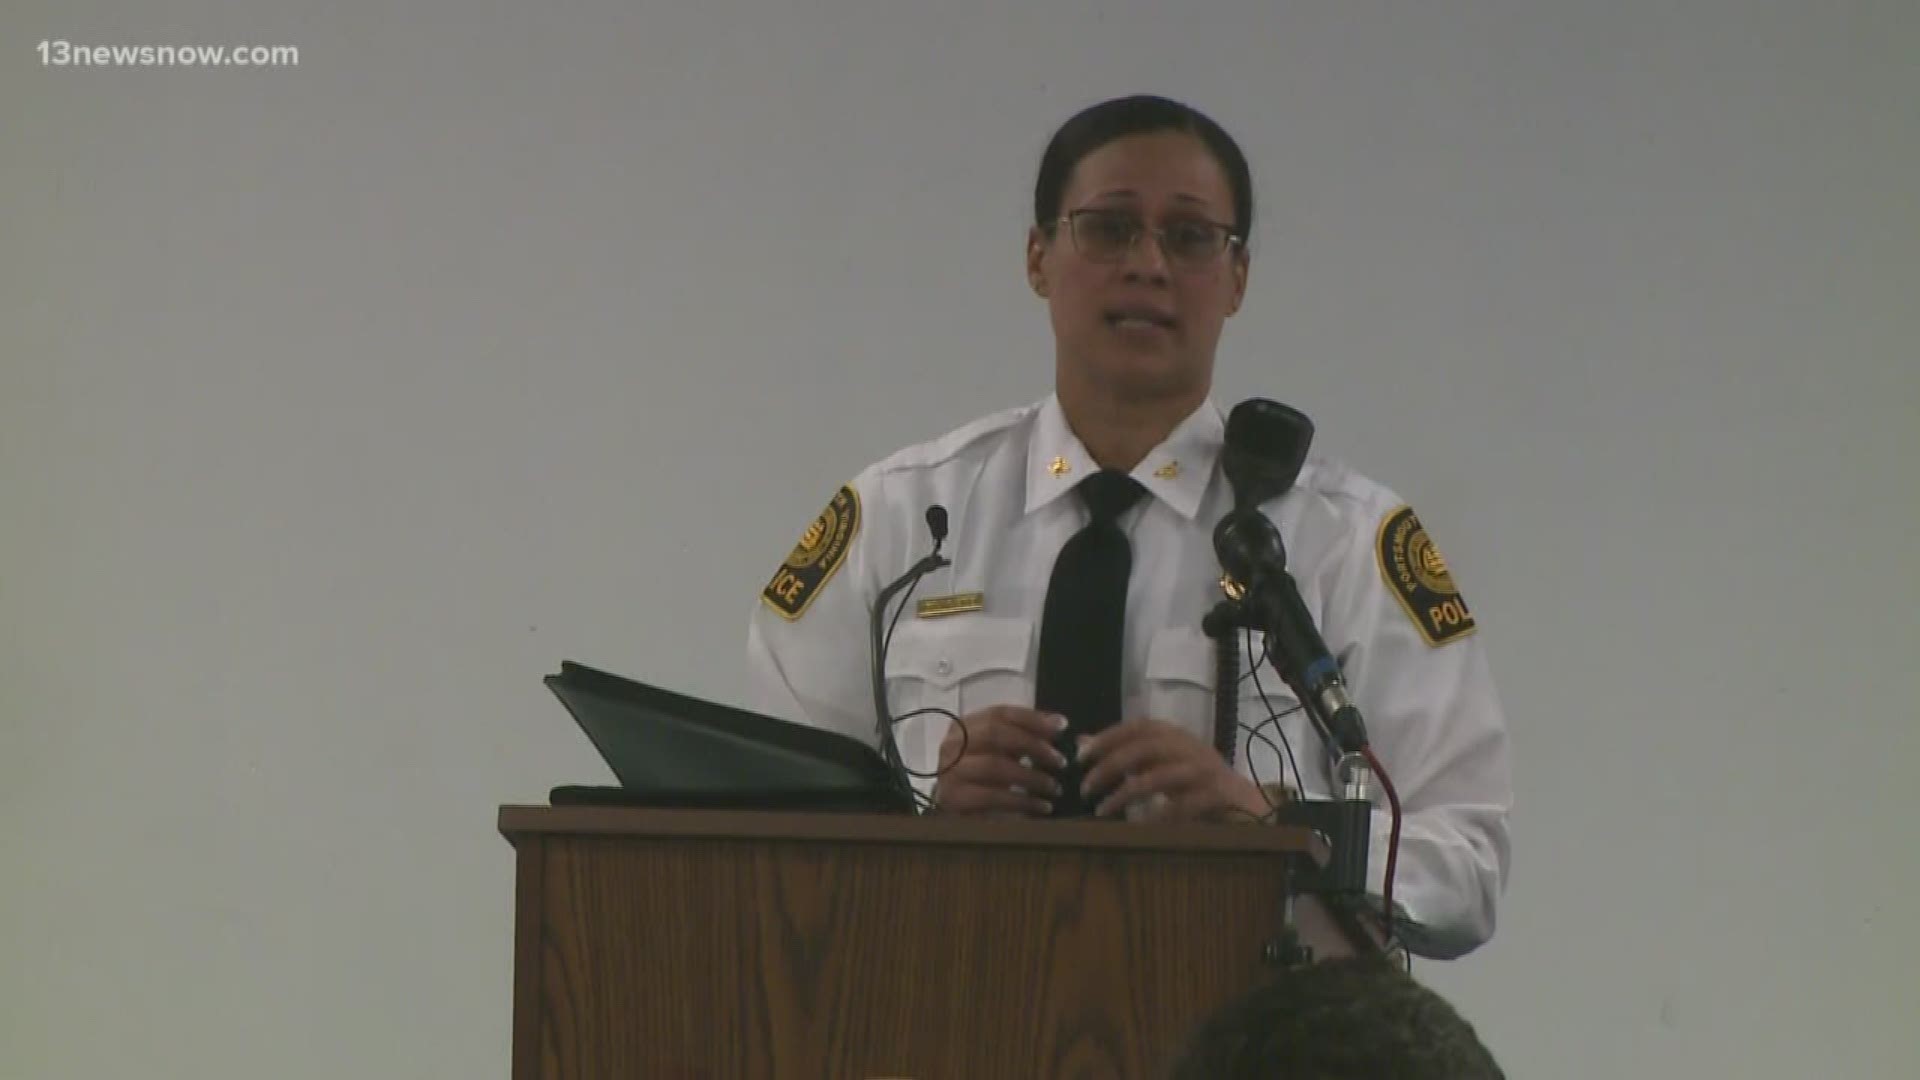 Just a few months after Tonya Chapman handed in her resignation, Portsmouth has announced their new police chief -- interim chief Angela Greene.